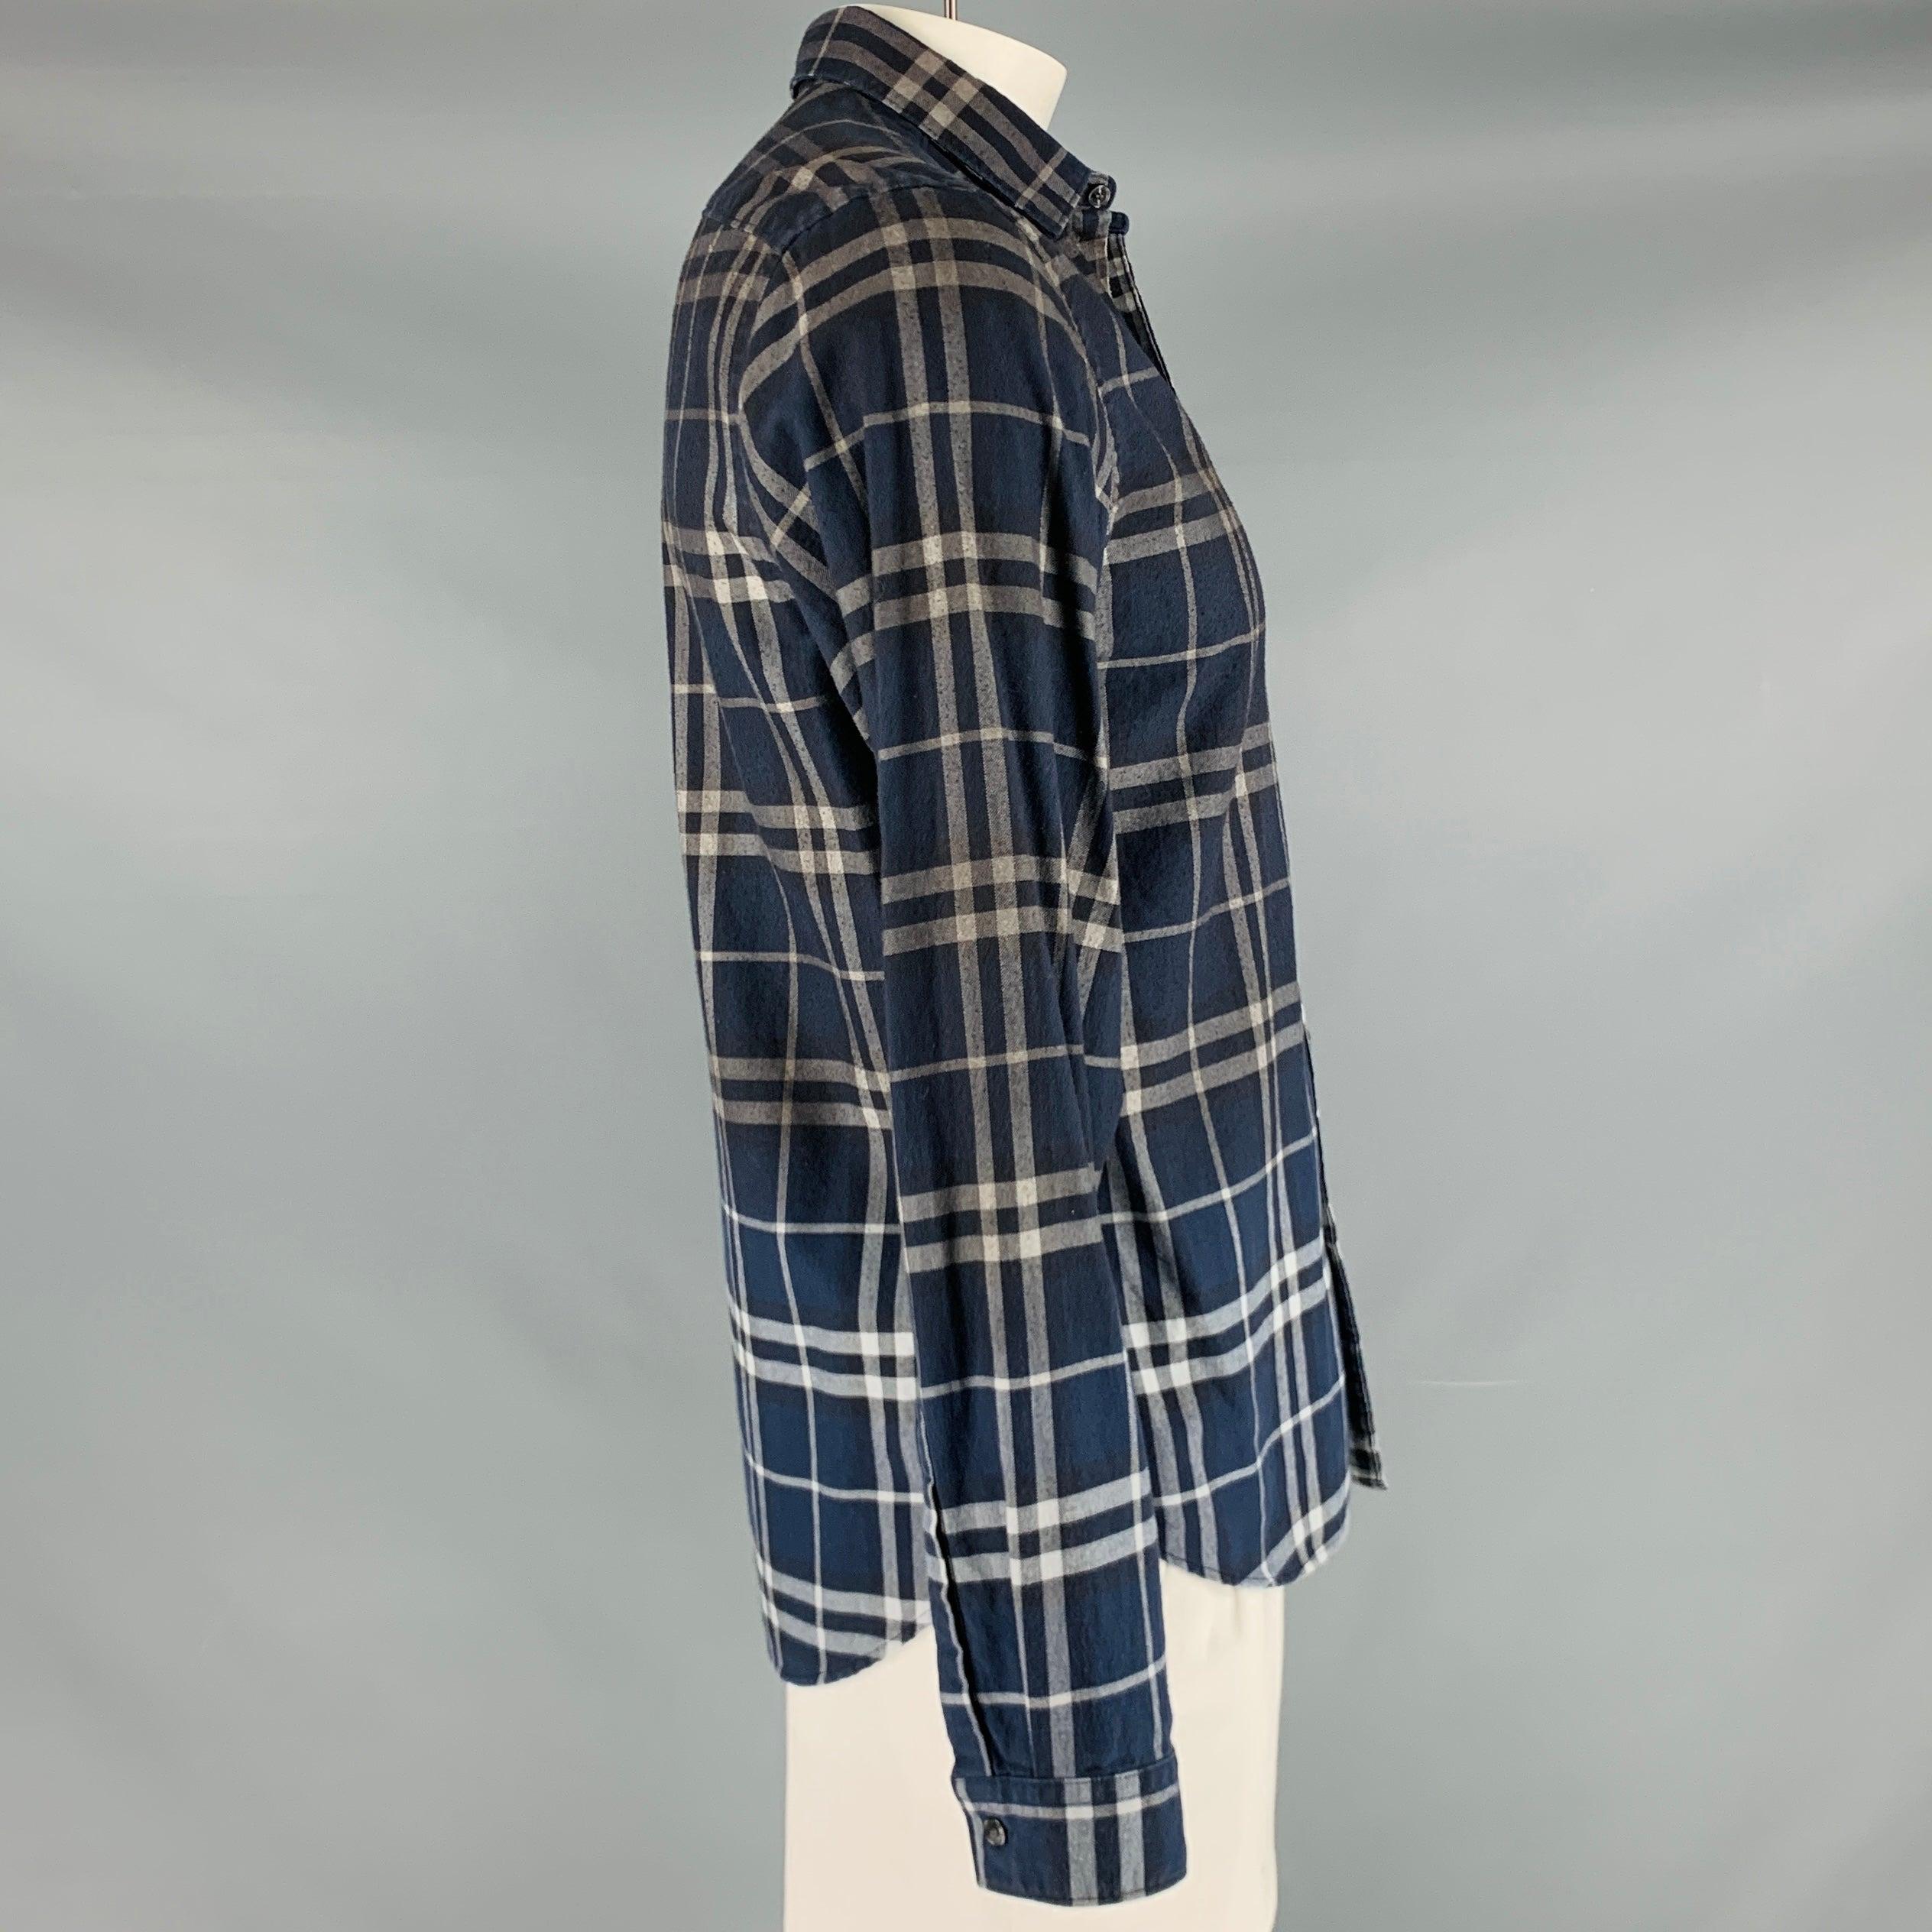 BURBERRY BRIT long sleeve shirt
in a navy and grey cotton woven fabric featuring a plaid pattern, spread collar, and button closureGood Pre-Owned Condition. Moderate pilling. 

Marked:   L 

Measurements: 
 
Shoulder: 17 inches Chest: 41 inches